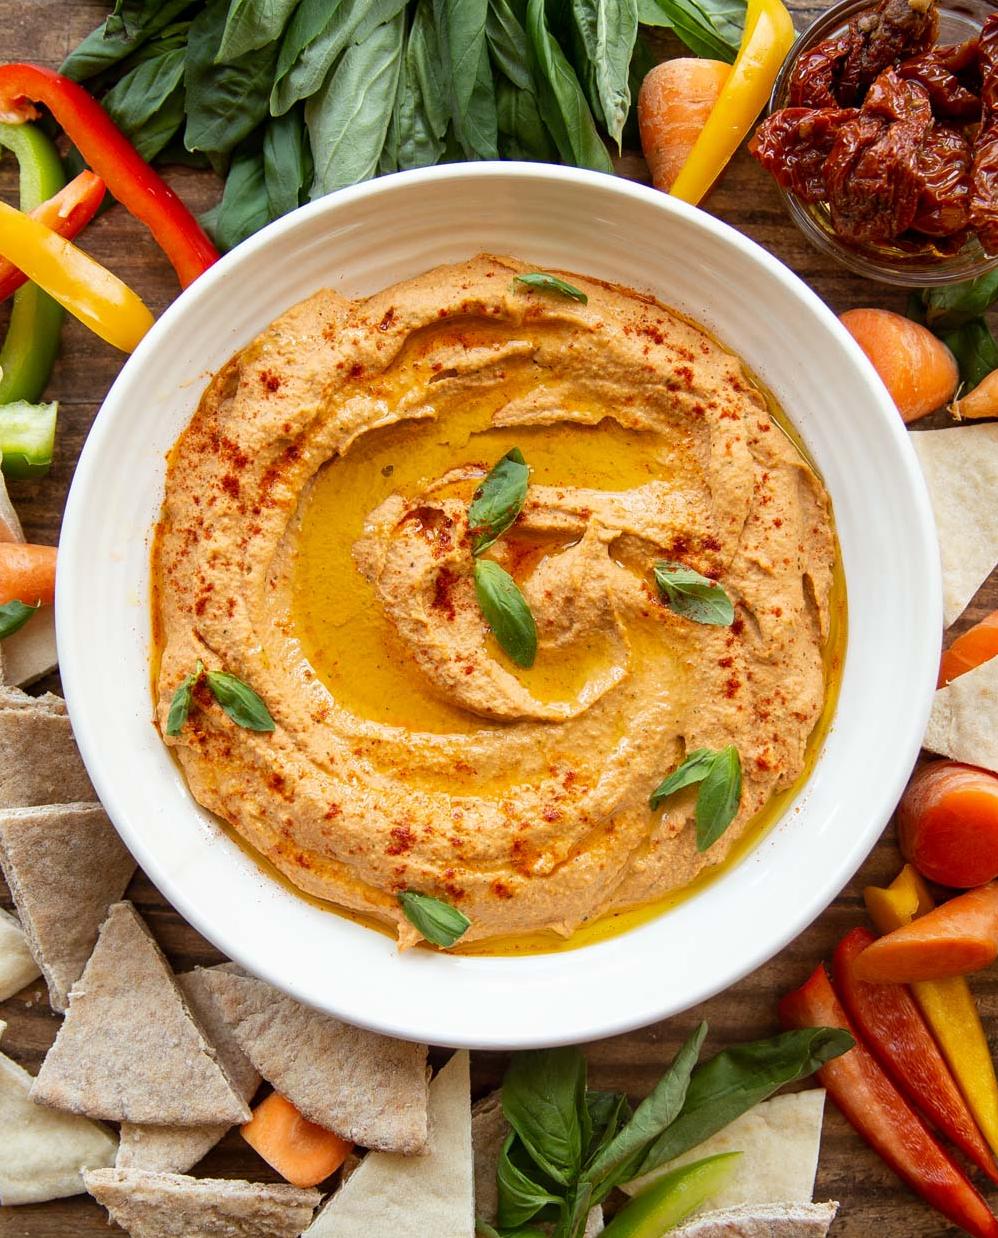  This creamy and flavorful dip is perfect for a picnic or BBQ gathering with your friends and family.